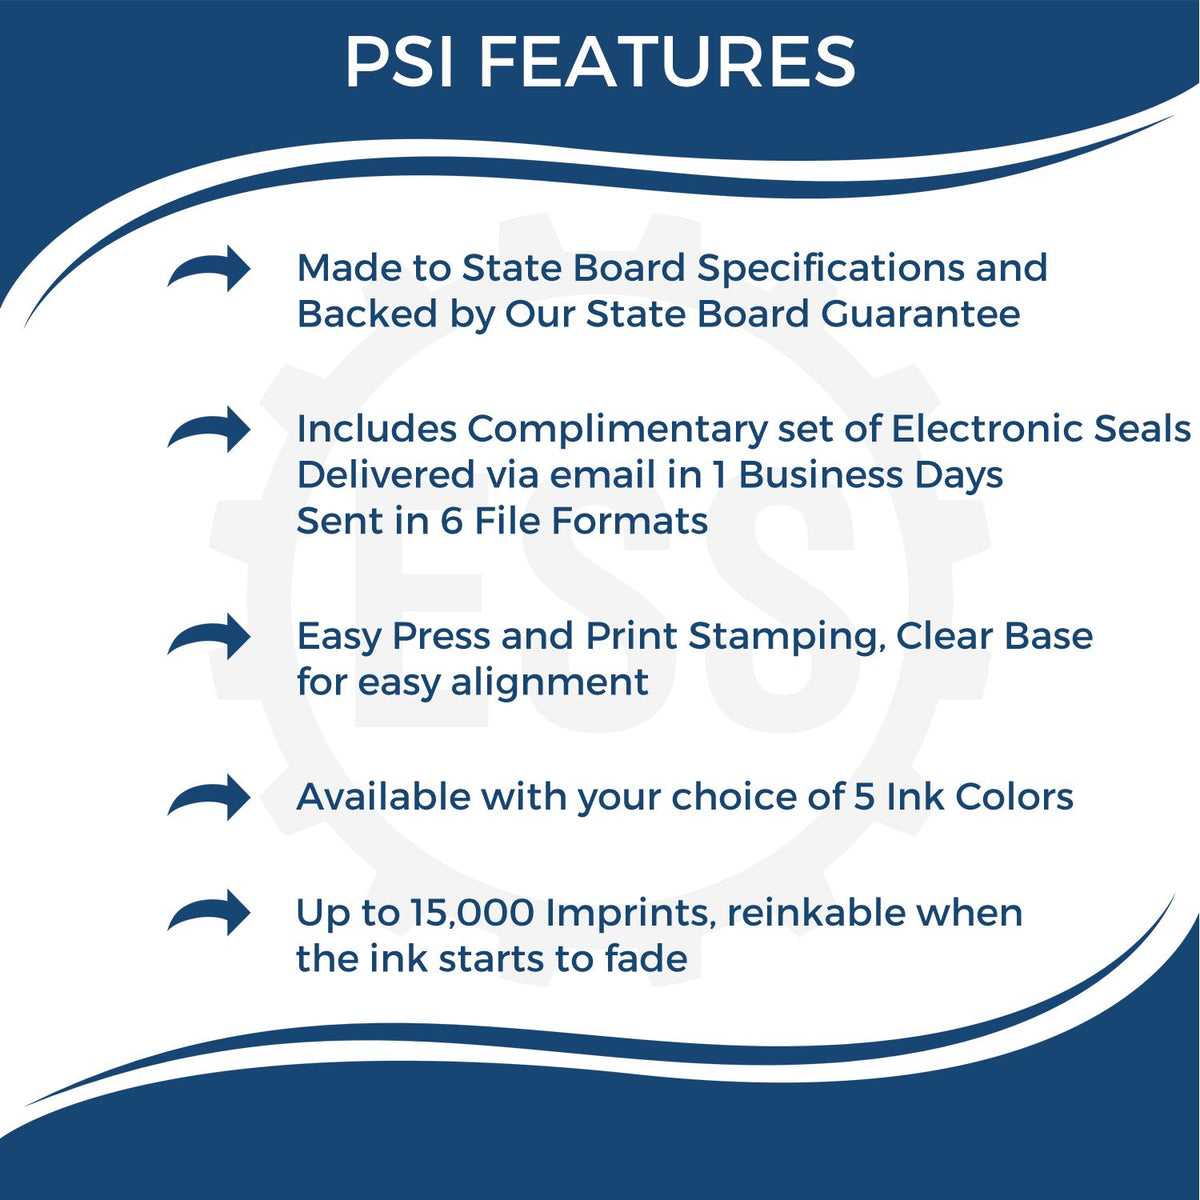 A picture of an infographic highlighting the selling points for the PSI Oklahoma Notary Stamp